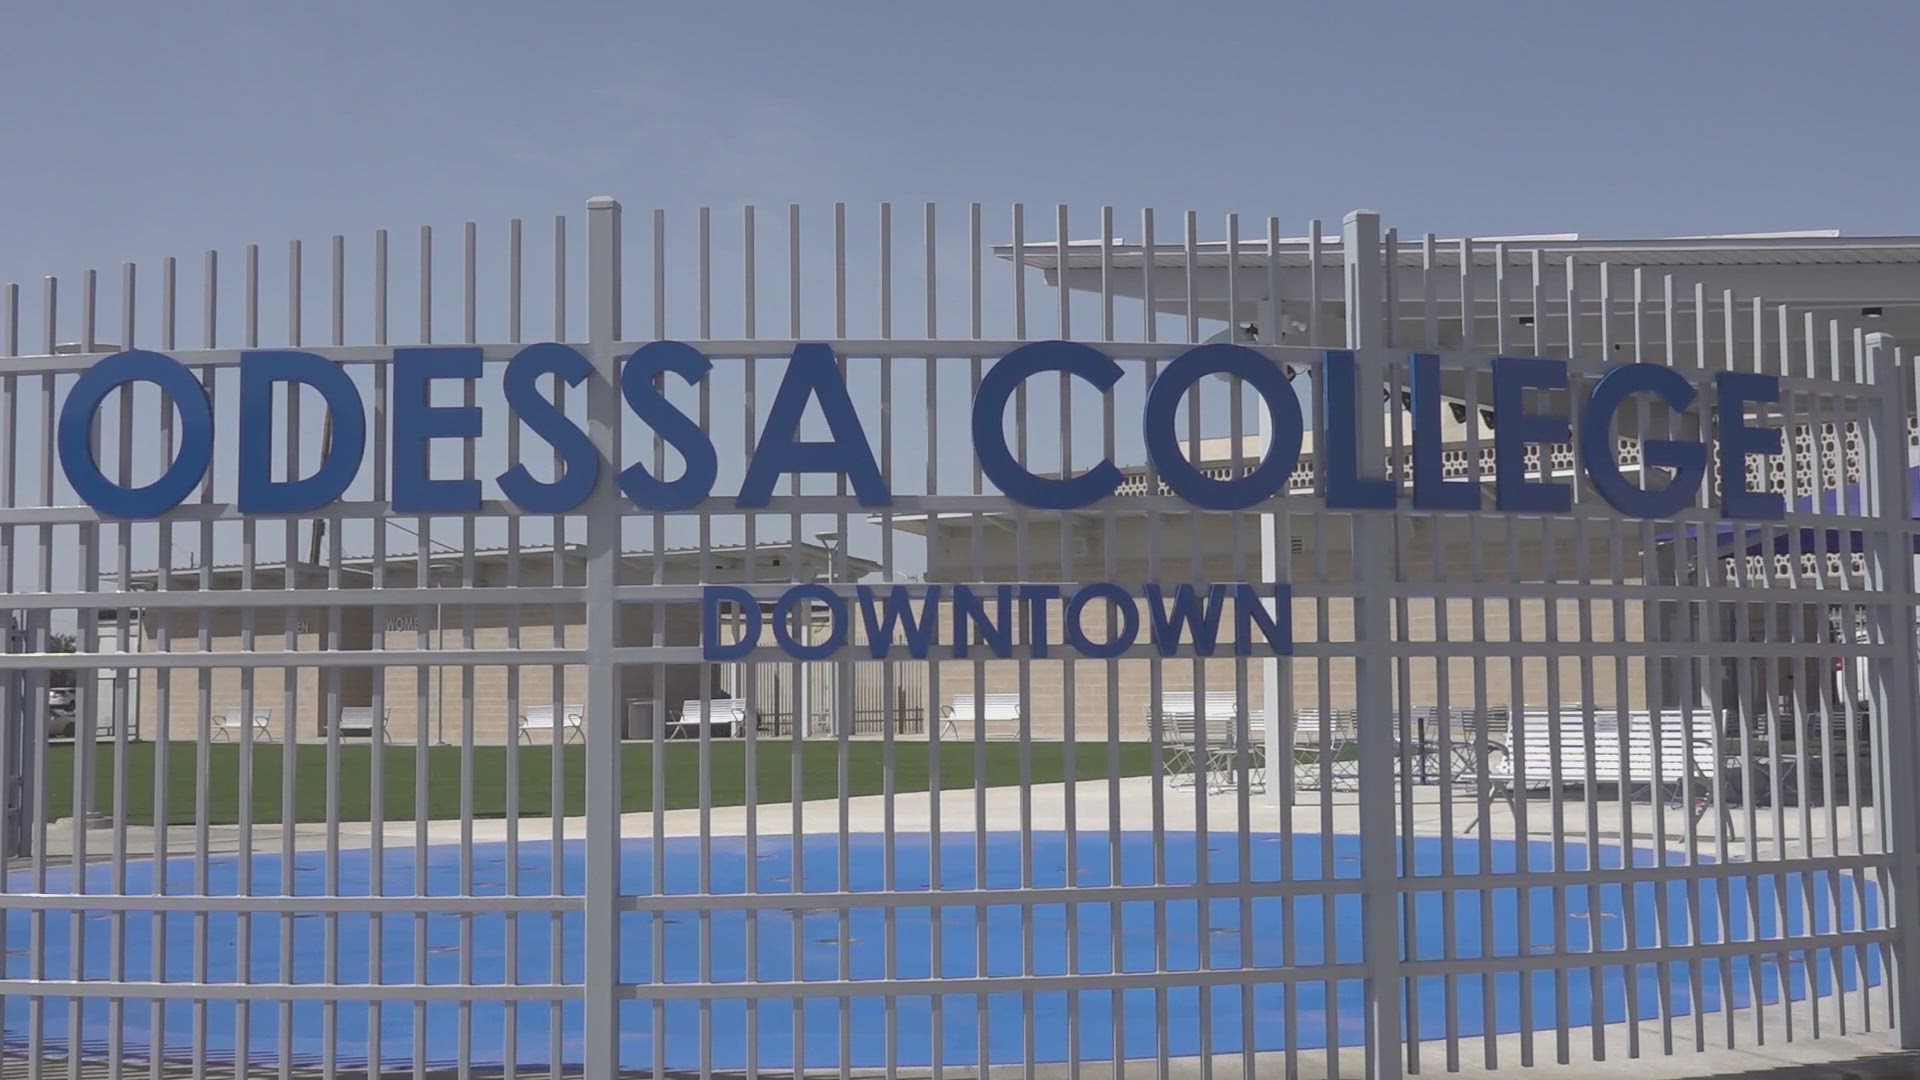 The Odessa College Downtown park had a grand opening Thursday.